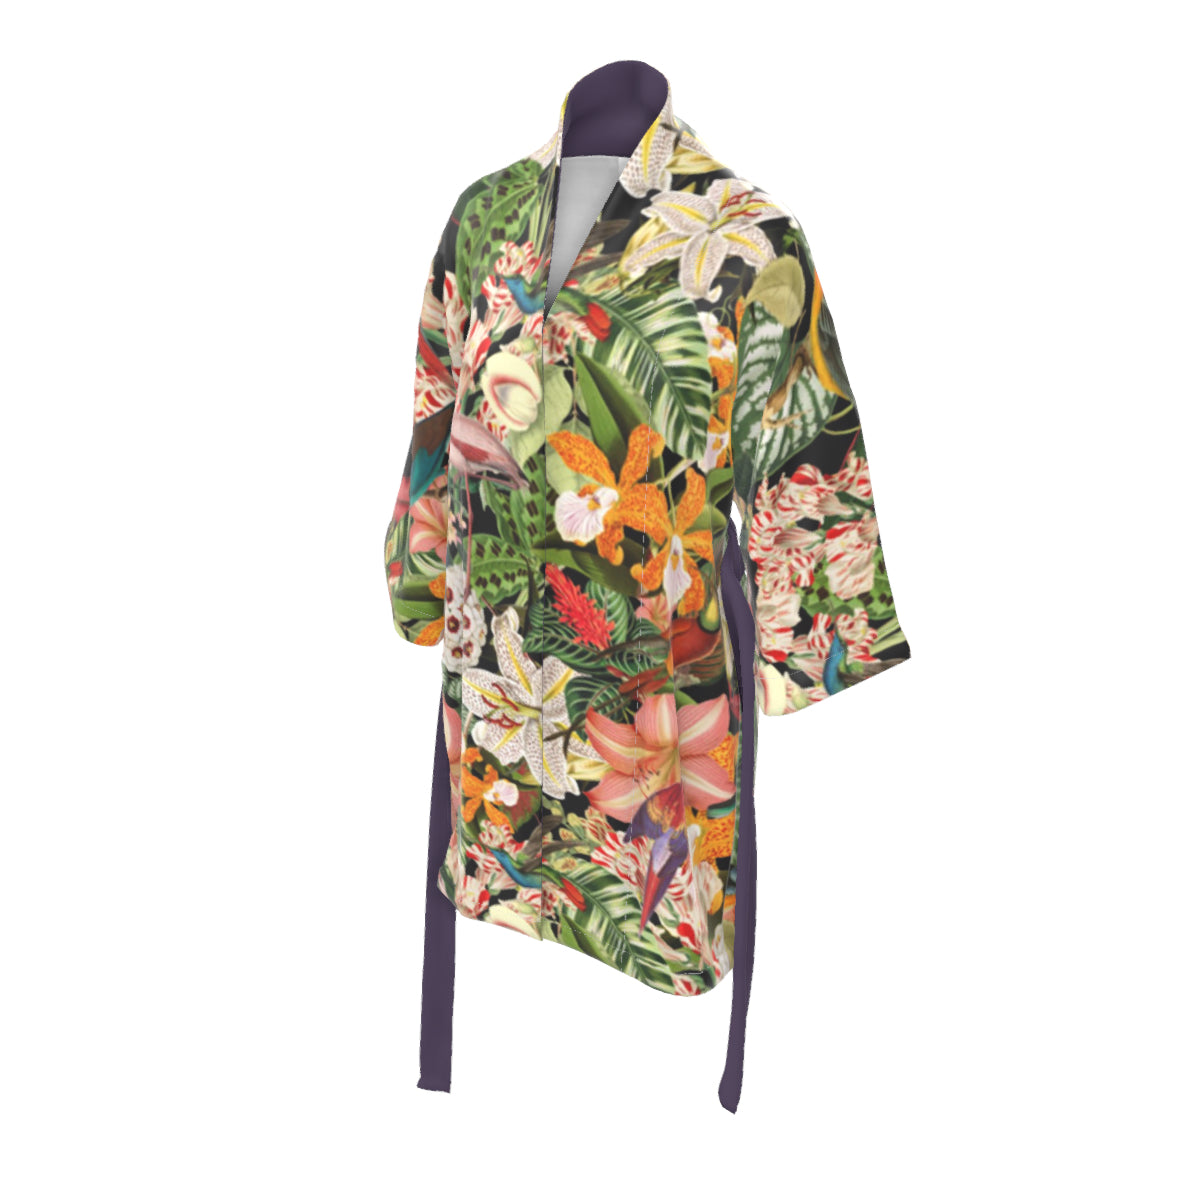 A luxury 100% silk Kimono in a maximalist tropical floral inspired design called - Tropical Bomb